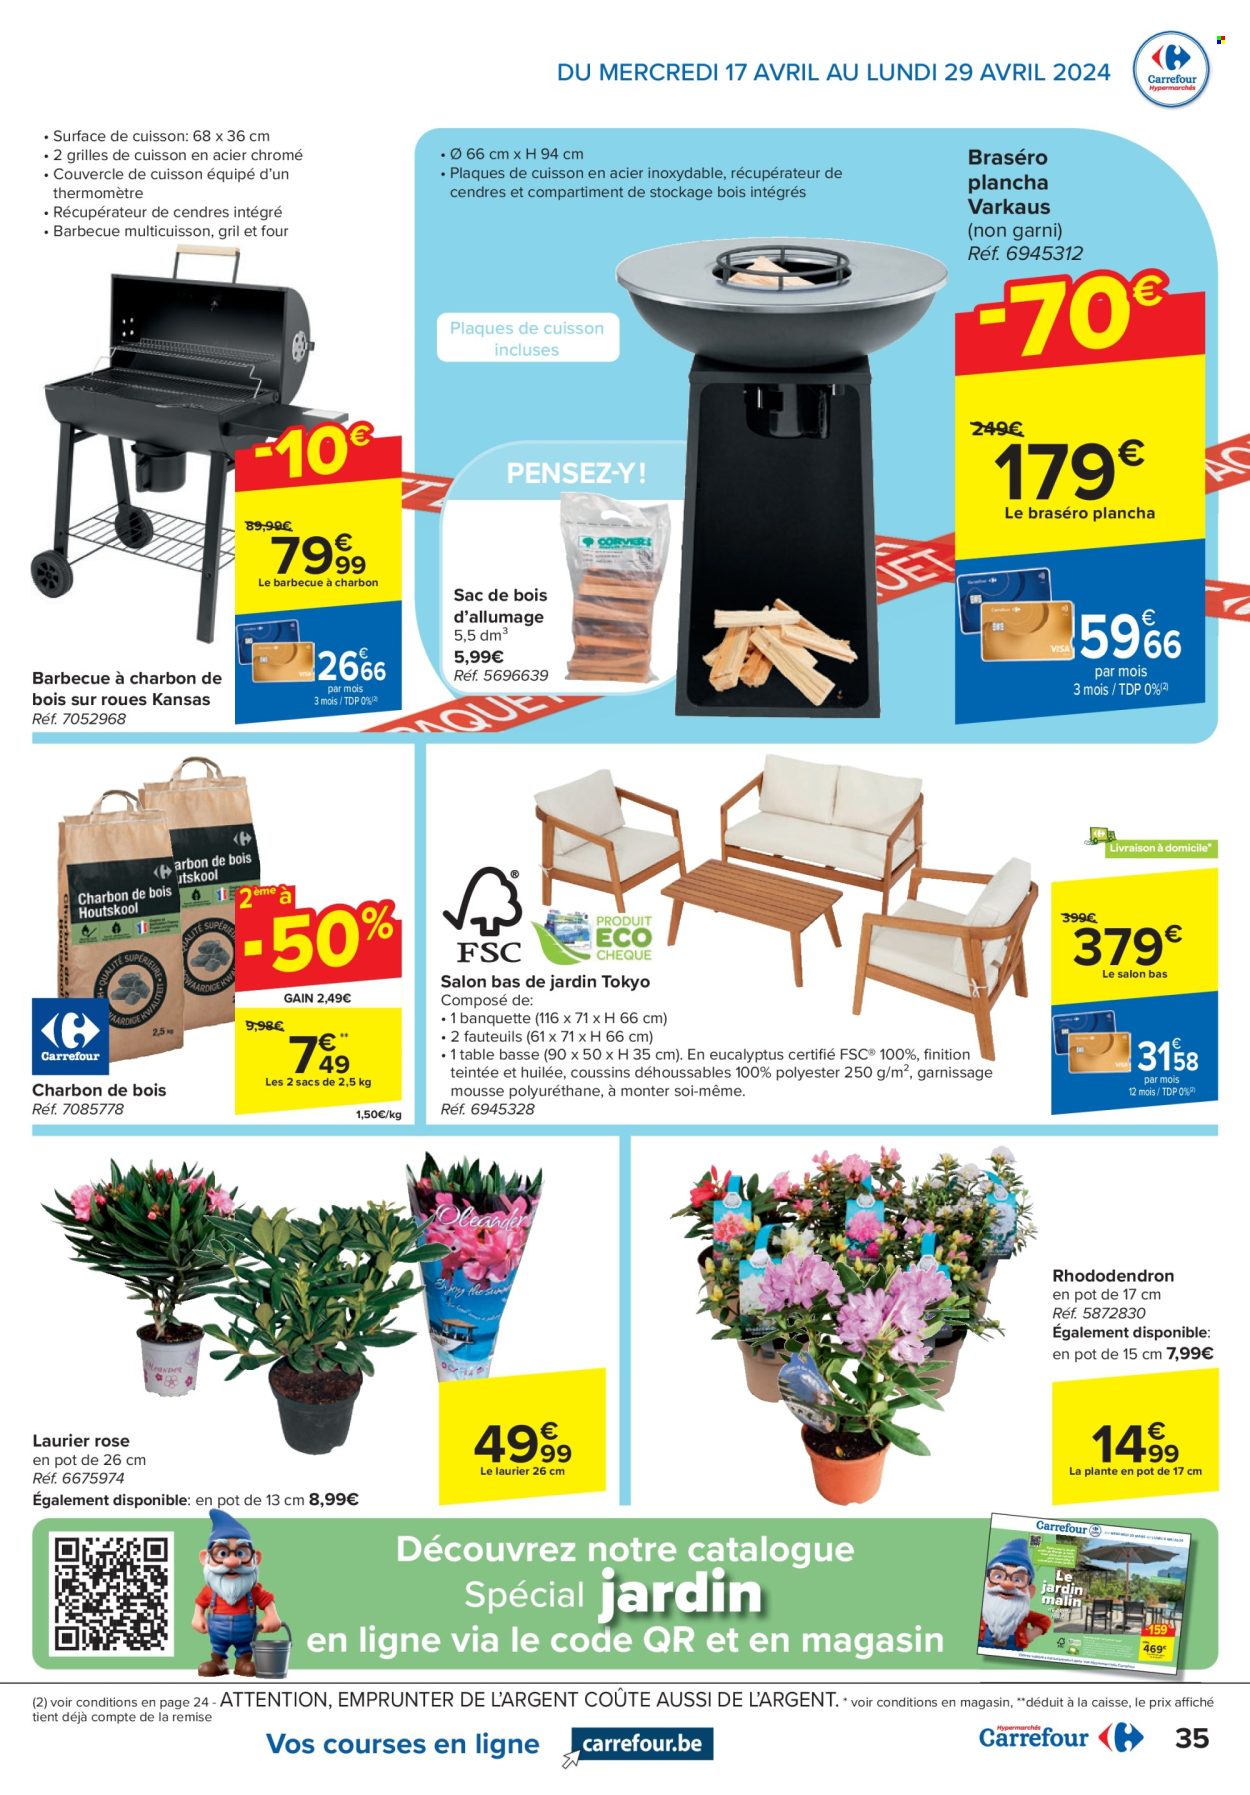 Catalogue Carrefour hypermarkt - 17.4.2024 - 29.4.2024. Page 35.